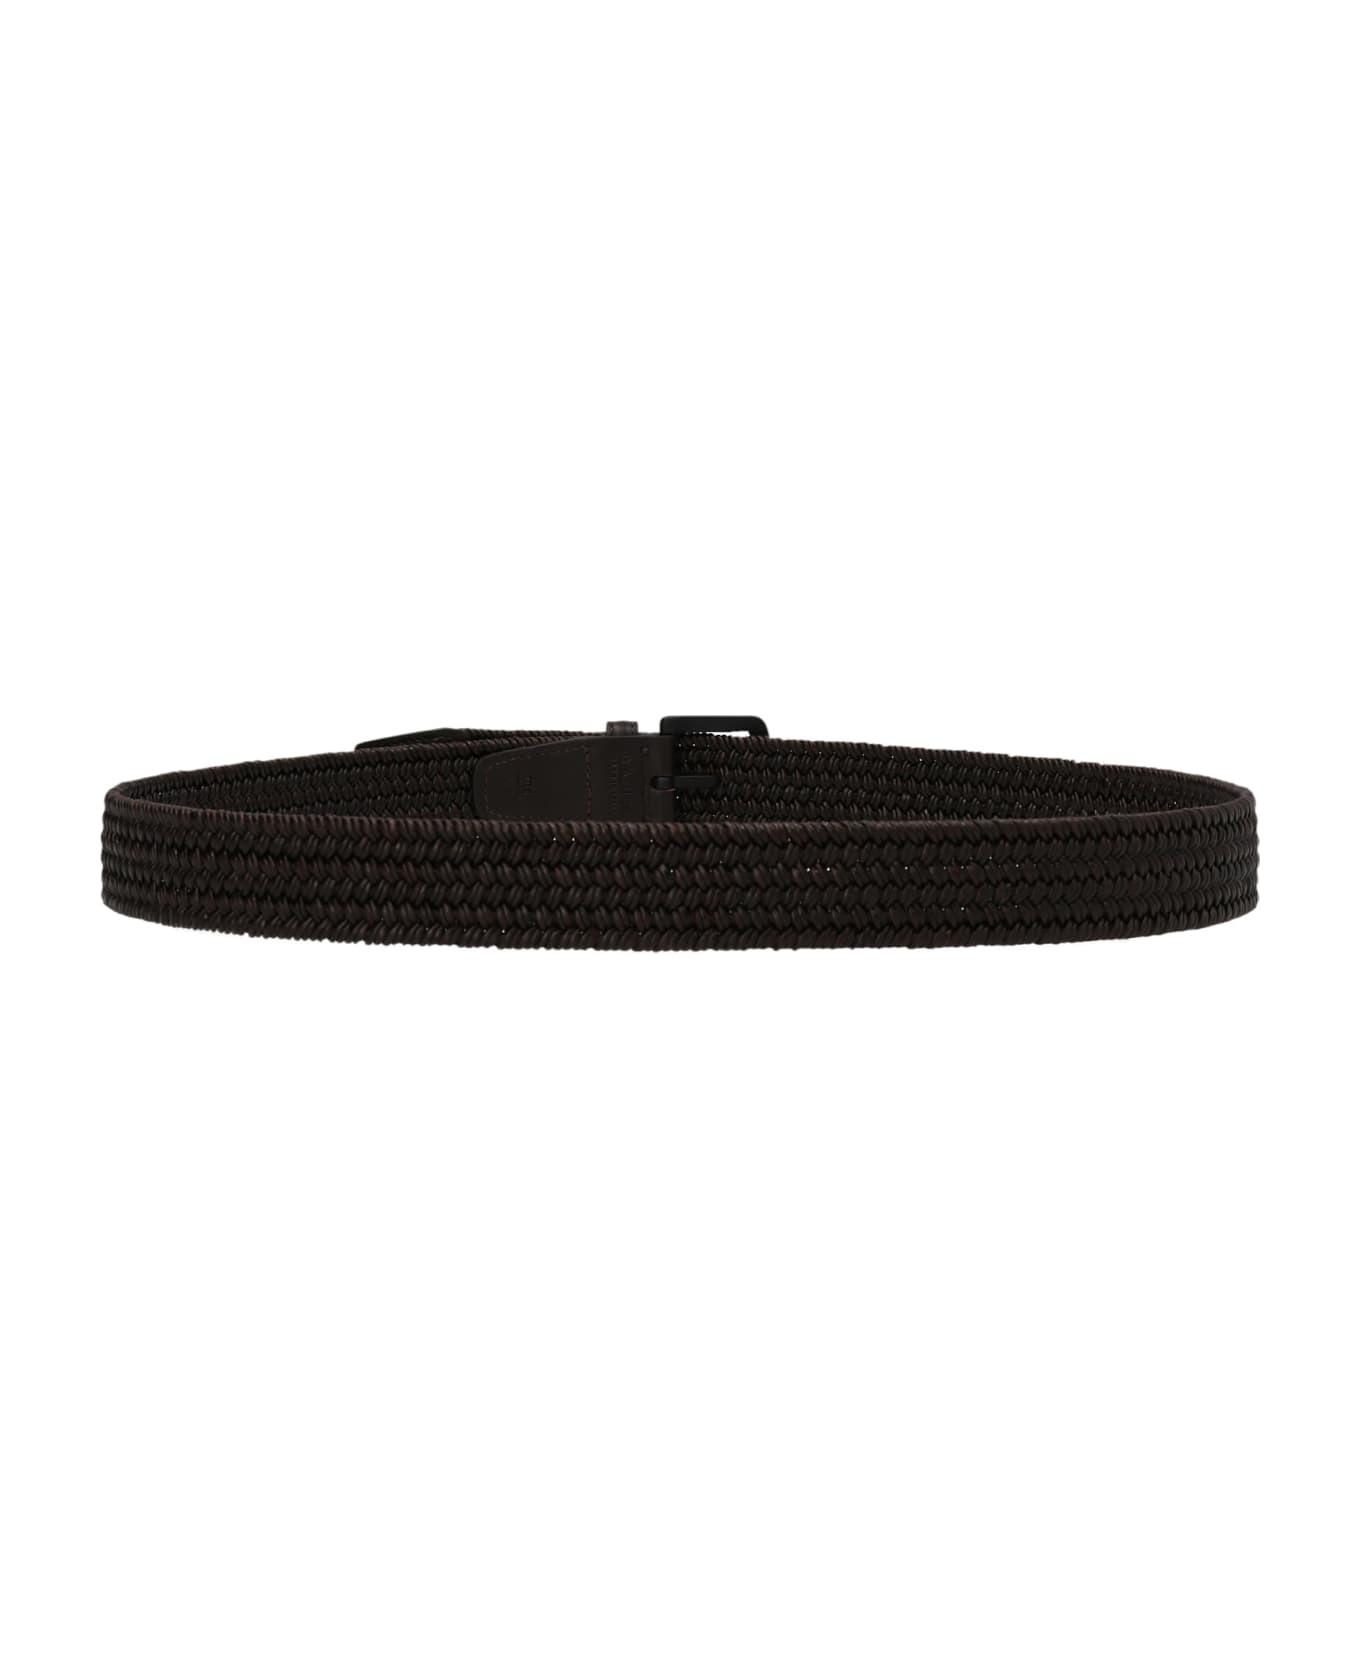 D'Amico Braided Leather Belt - Brown ベルト